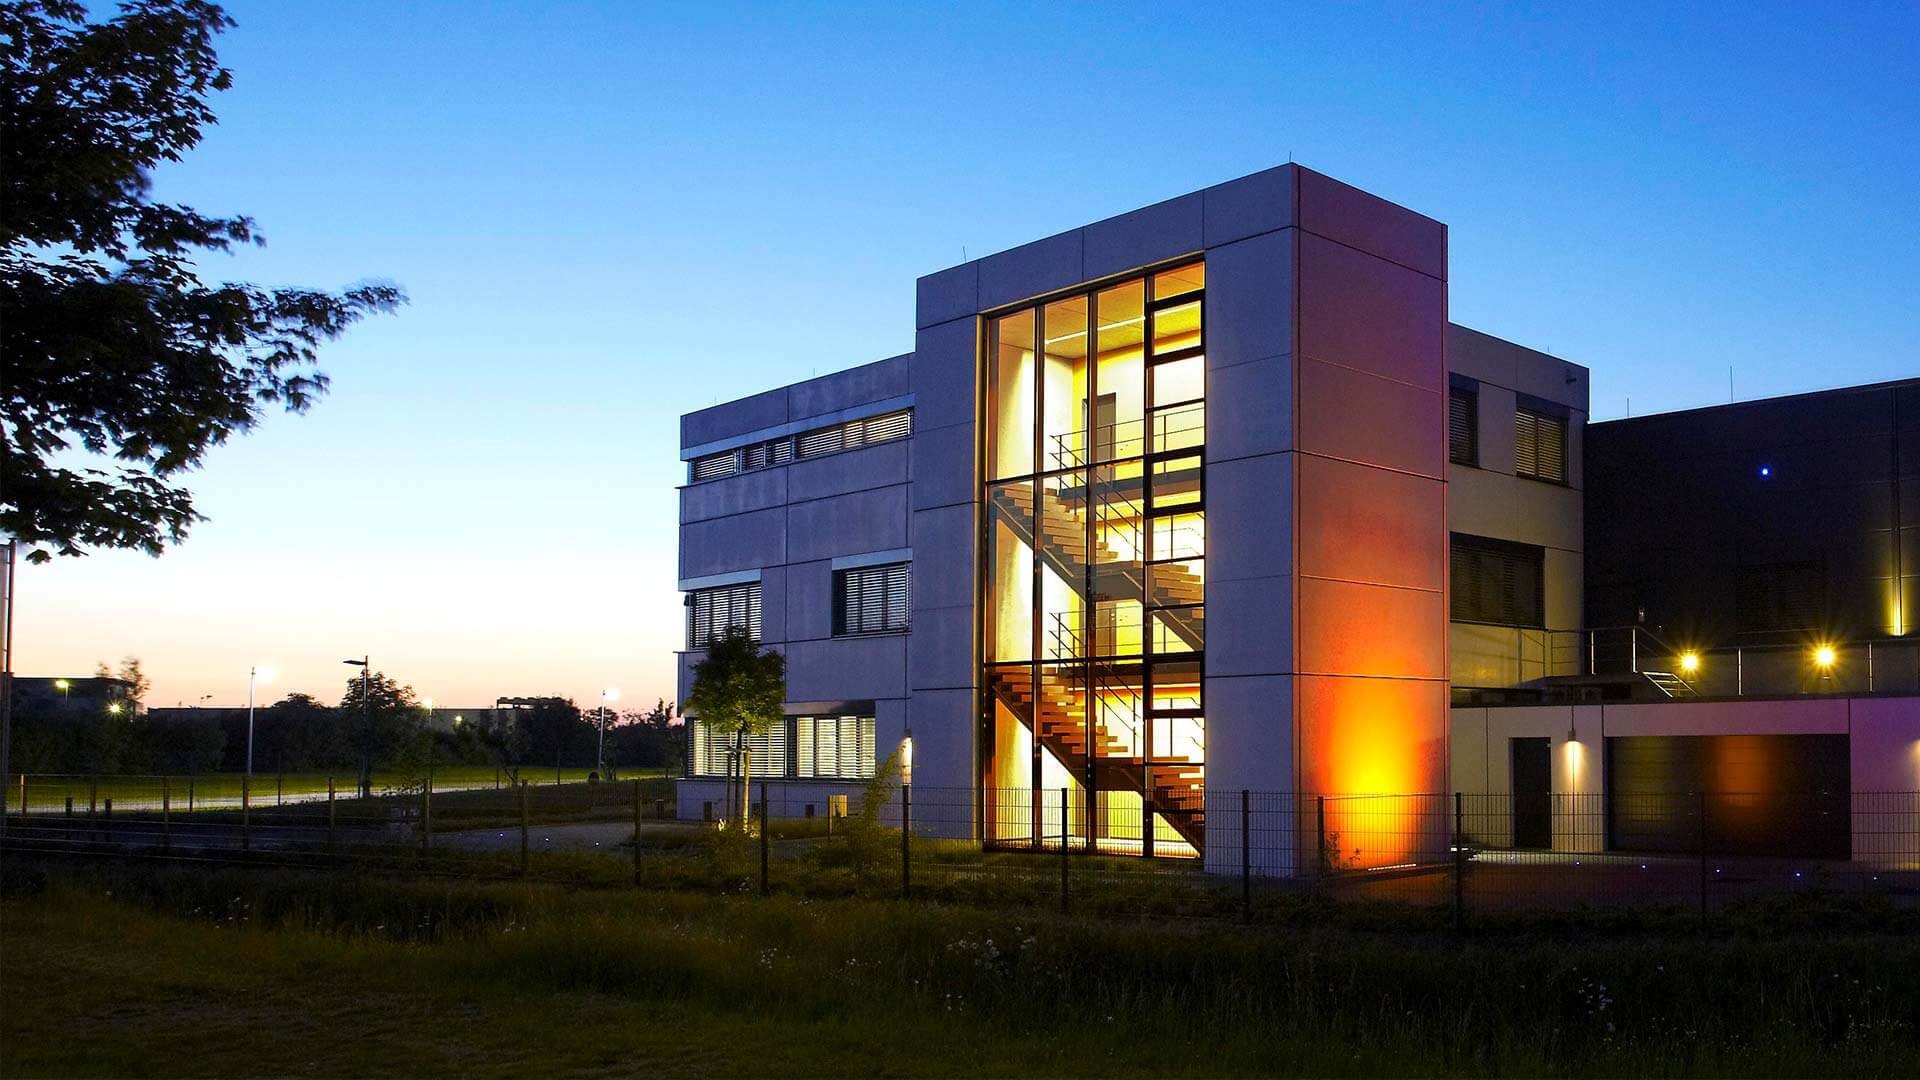 aixFOAM soundproofing - The state-of-the-art production building in Eschweiler, Germany